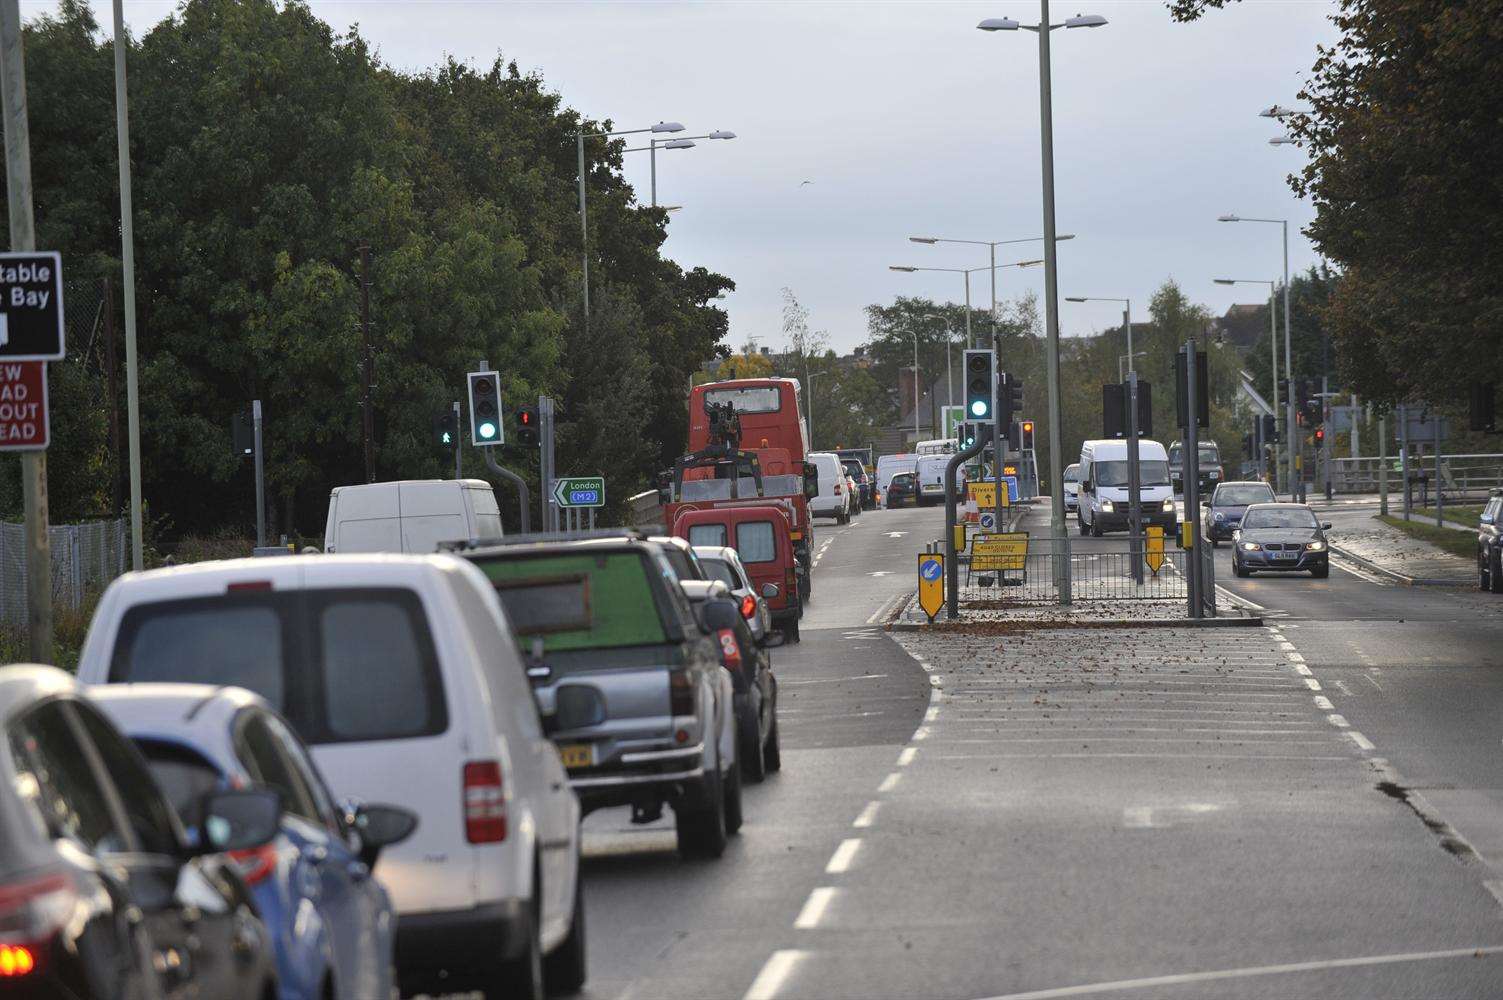 The diversion caused chaos in Canterbury. Picture: Tony Flashman